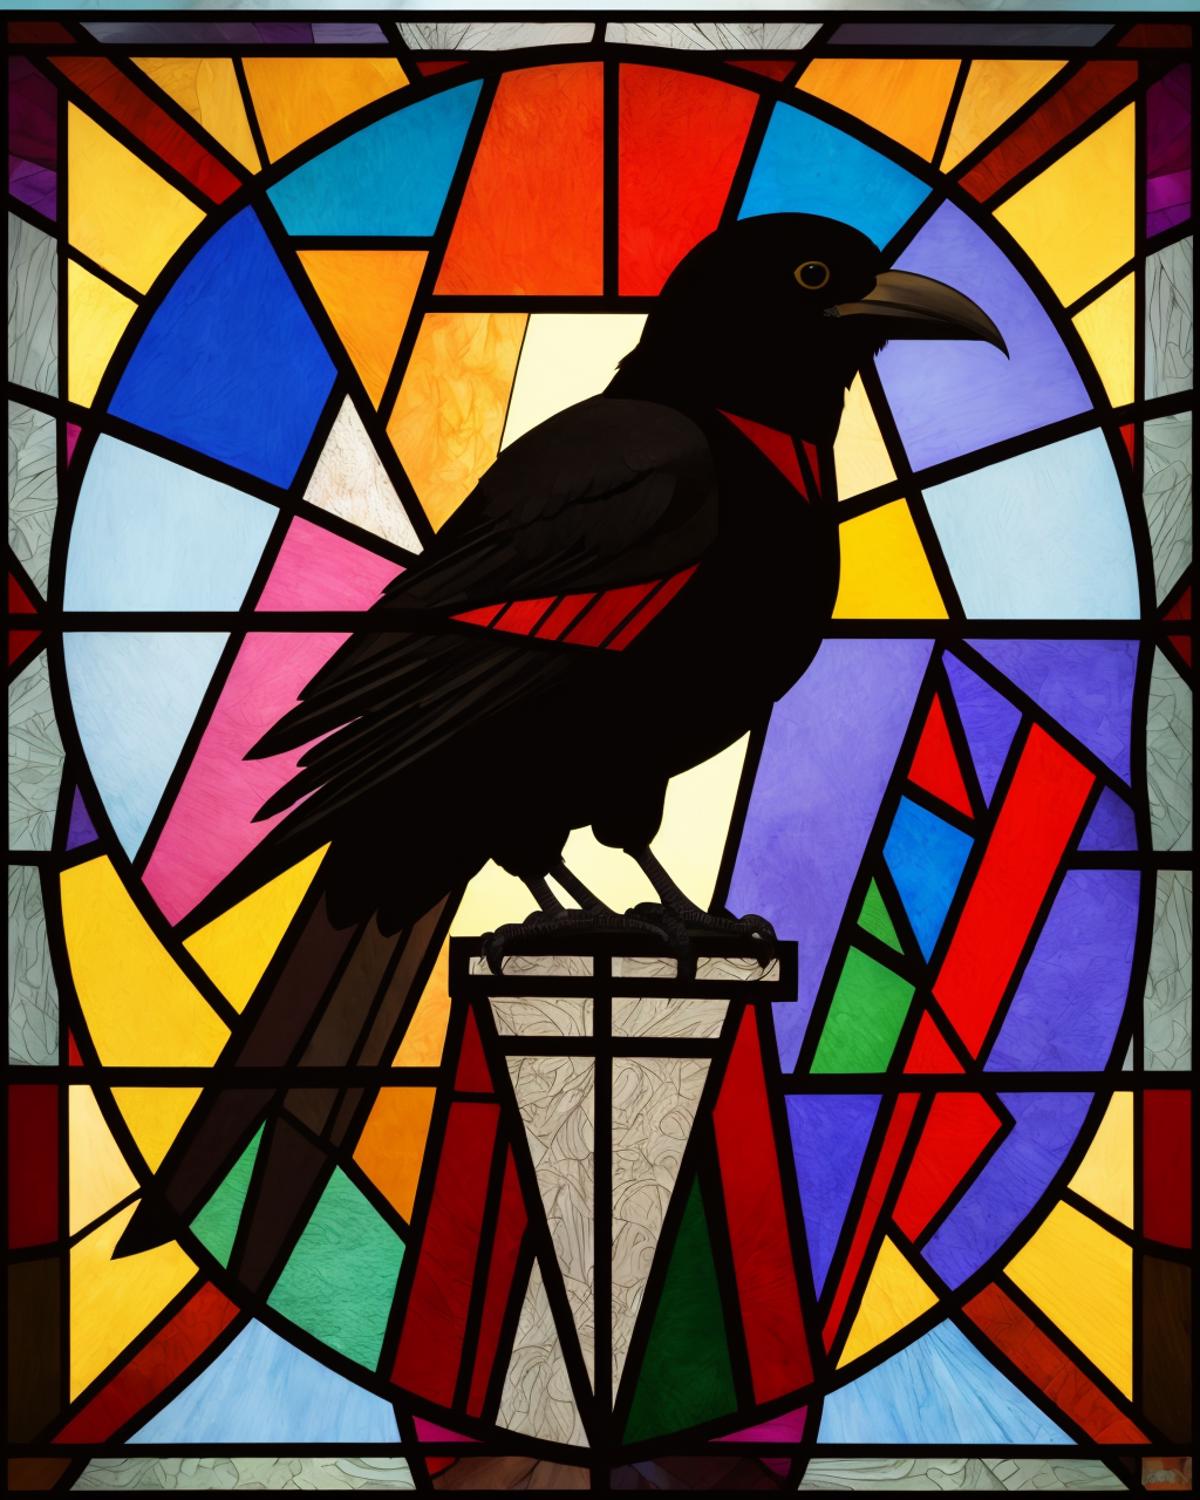 Stained glass image by oosayam